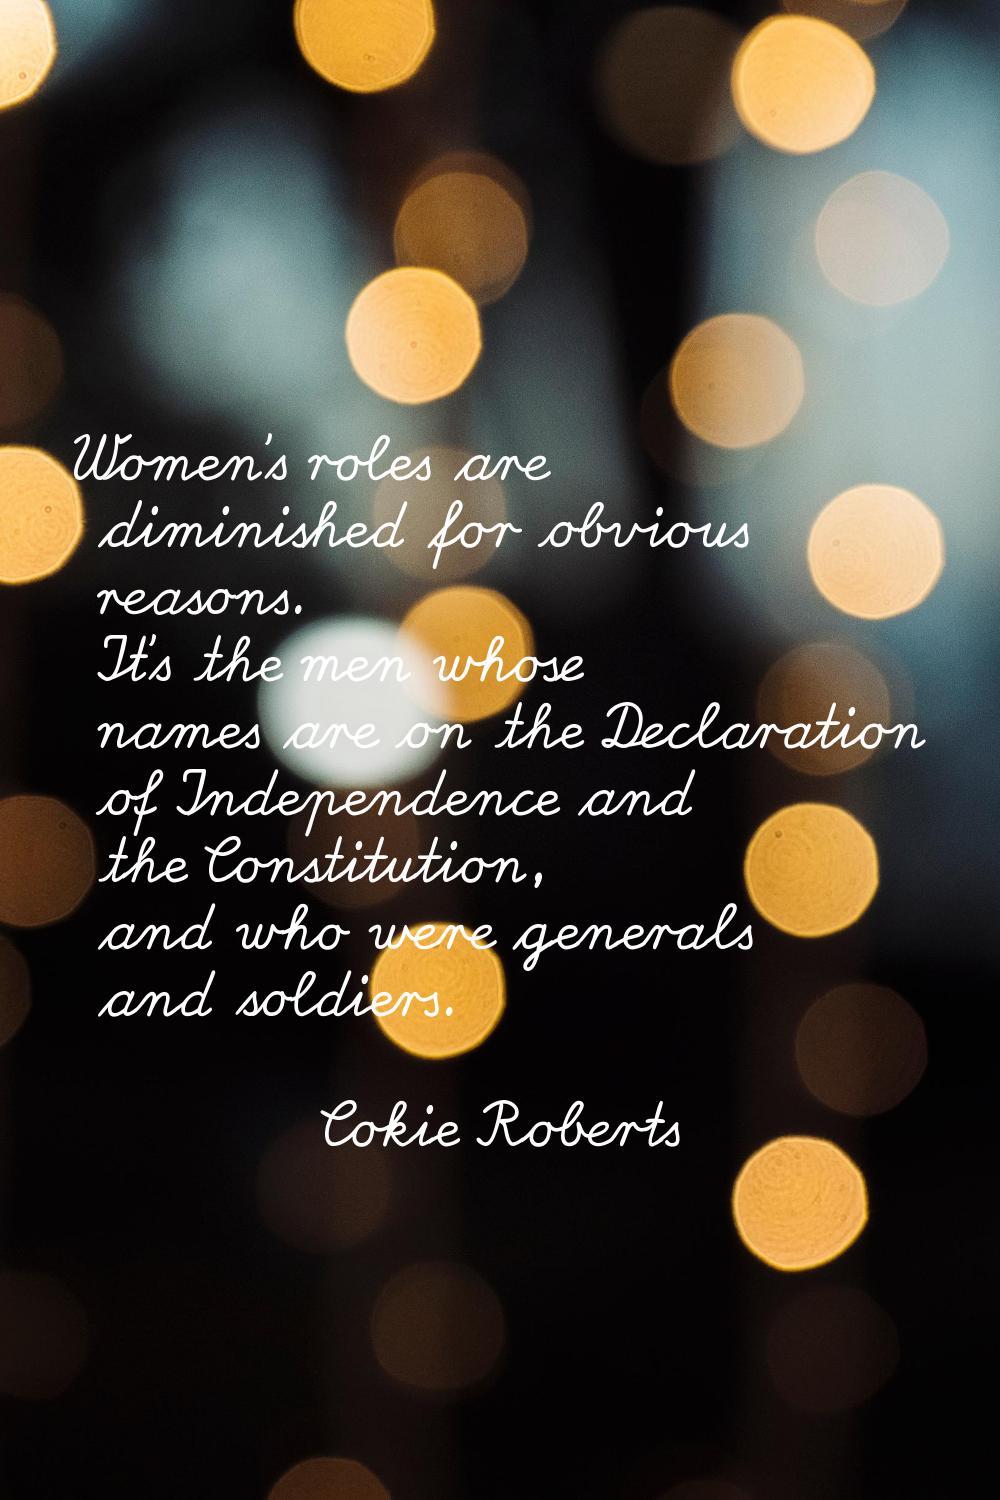 Women's roles are diminished for obvious reasons. It's the men whose names are on the Declaration o